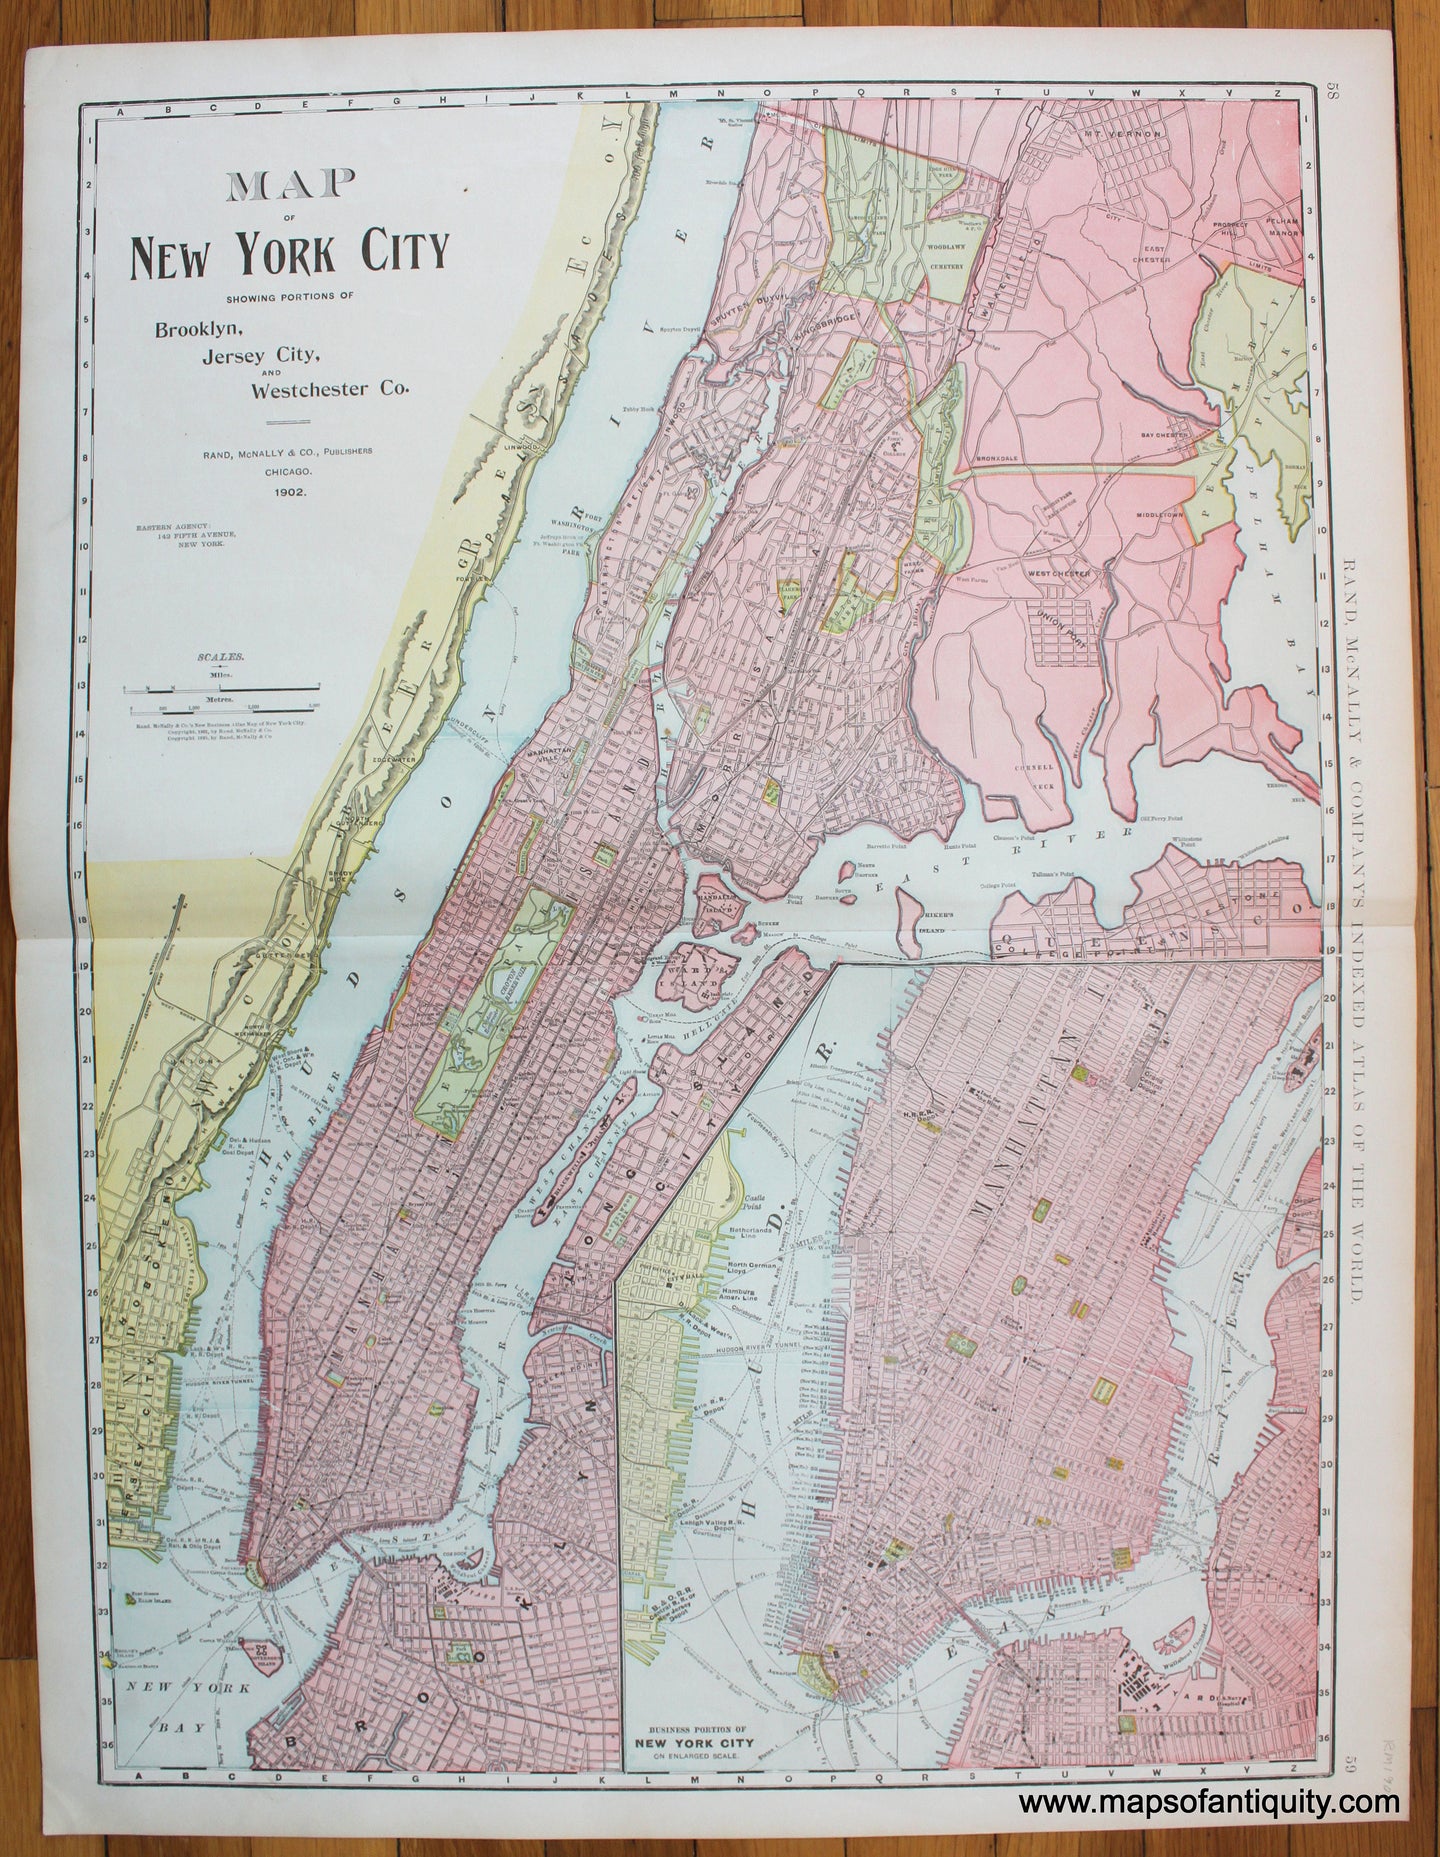 Maps-Antiquity-Antique-Map-NYC-New-York-City-Brooklyn-Jersey-City-Westchester-Co-County-Business-Portion-On-Enlarged-Scale-Rand-McNally-1901-1900s-Early-20th-Century